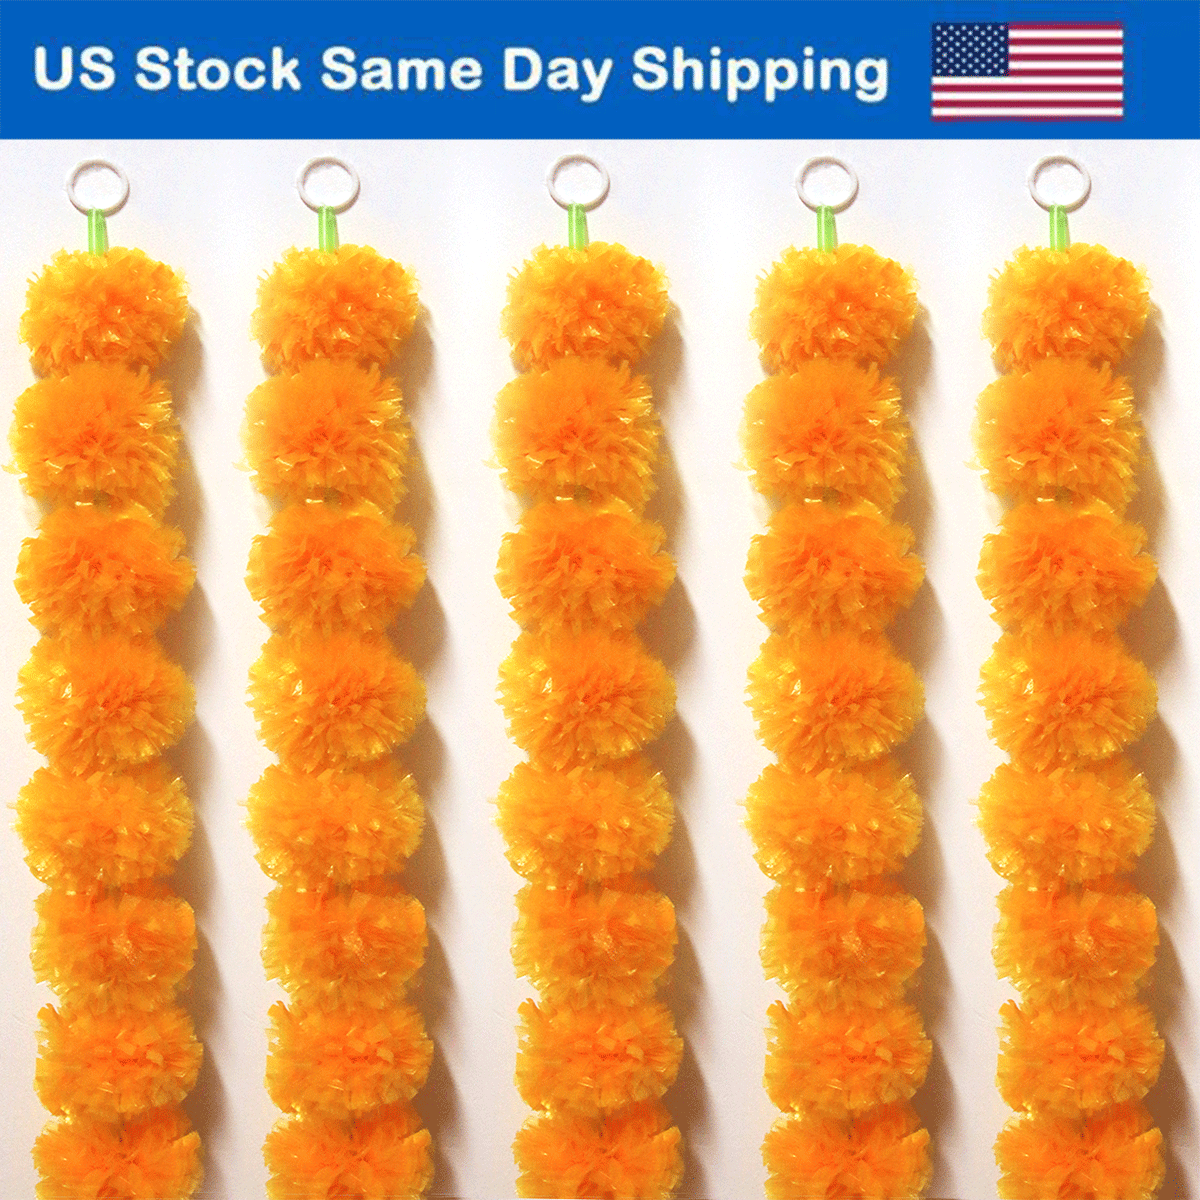 5Pack Marigold Garlands 5ft Artificial Marigold Flower Garland For Pooja/Puja TQS Does not apply